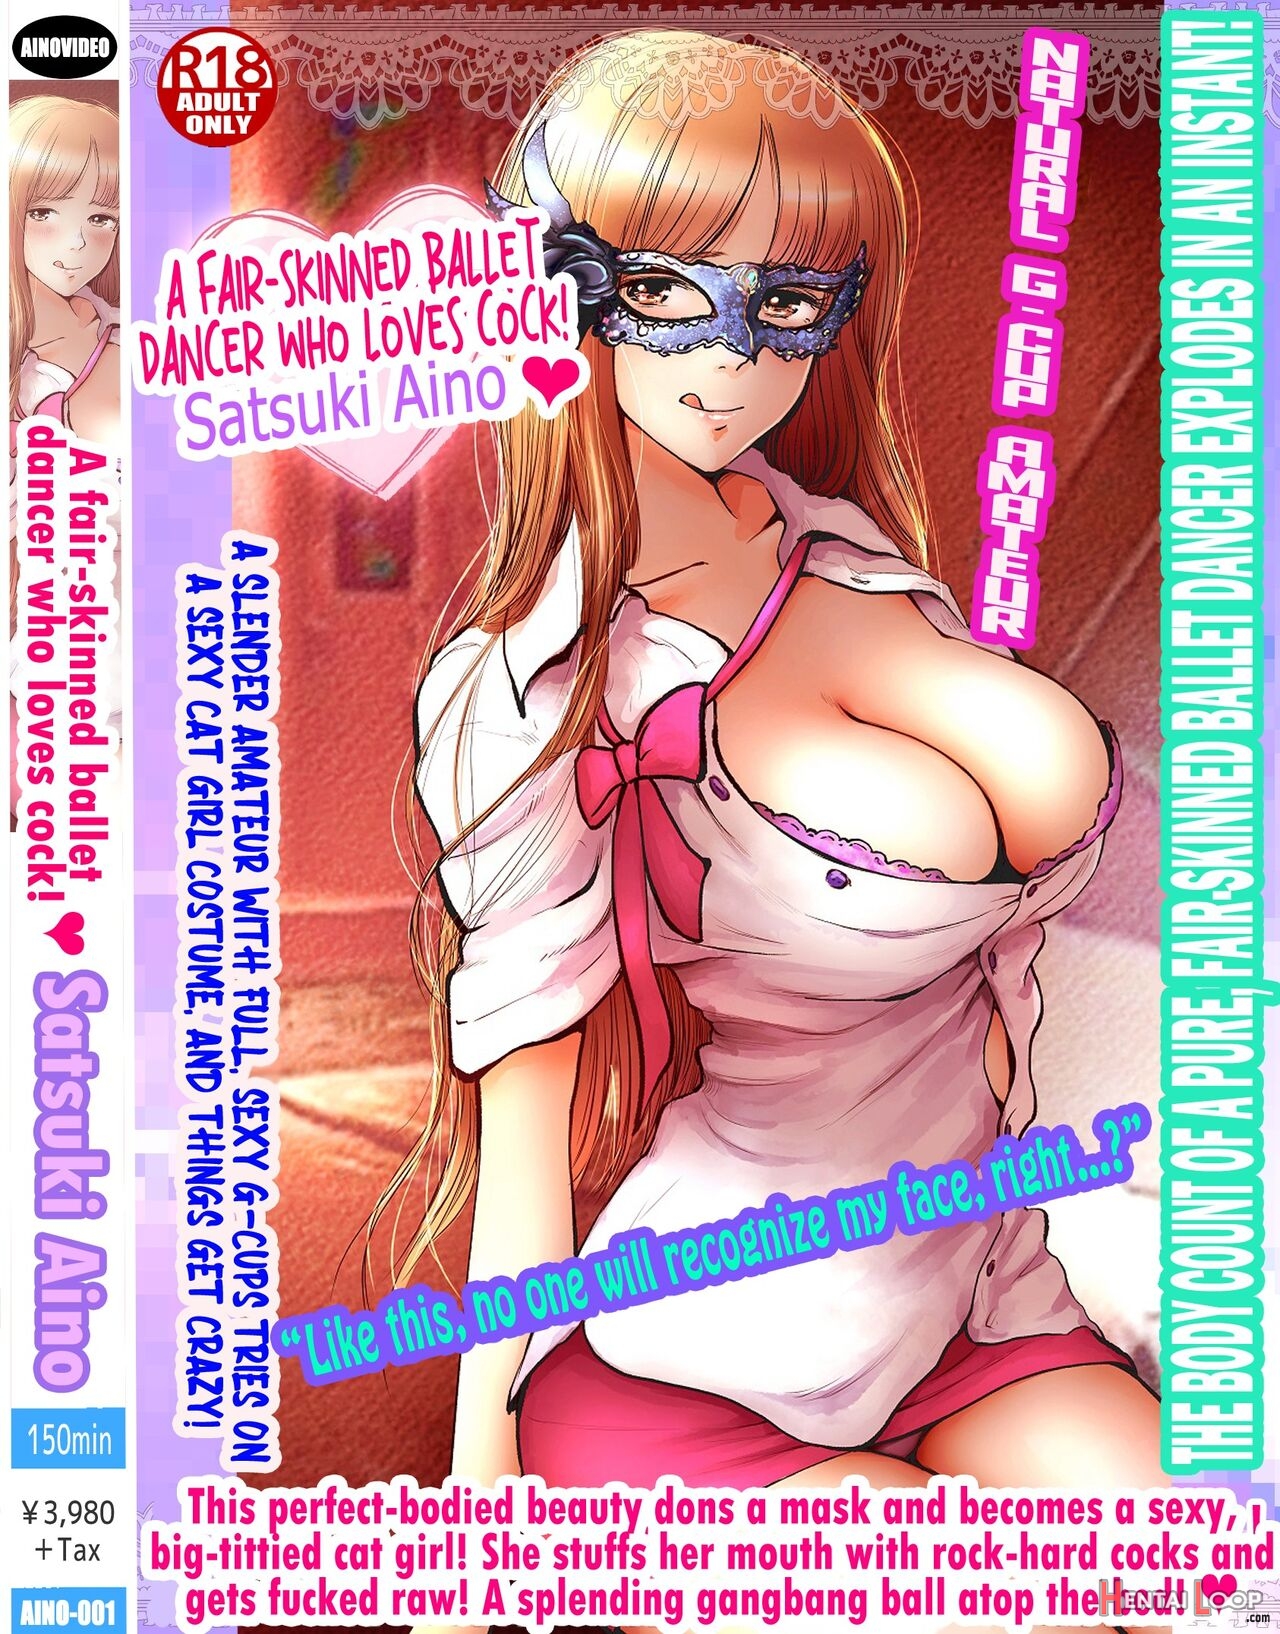 Full Story Of Girl Porn - Porn-filming Story (by Aino) - Hentai doujinshi for free at HentaiLoop